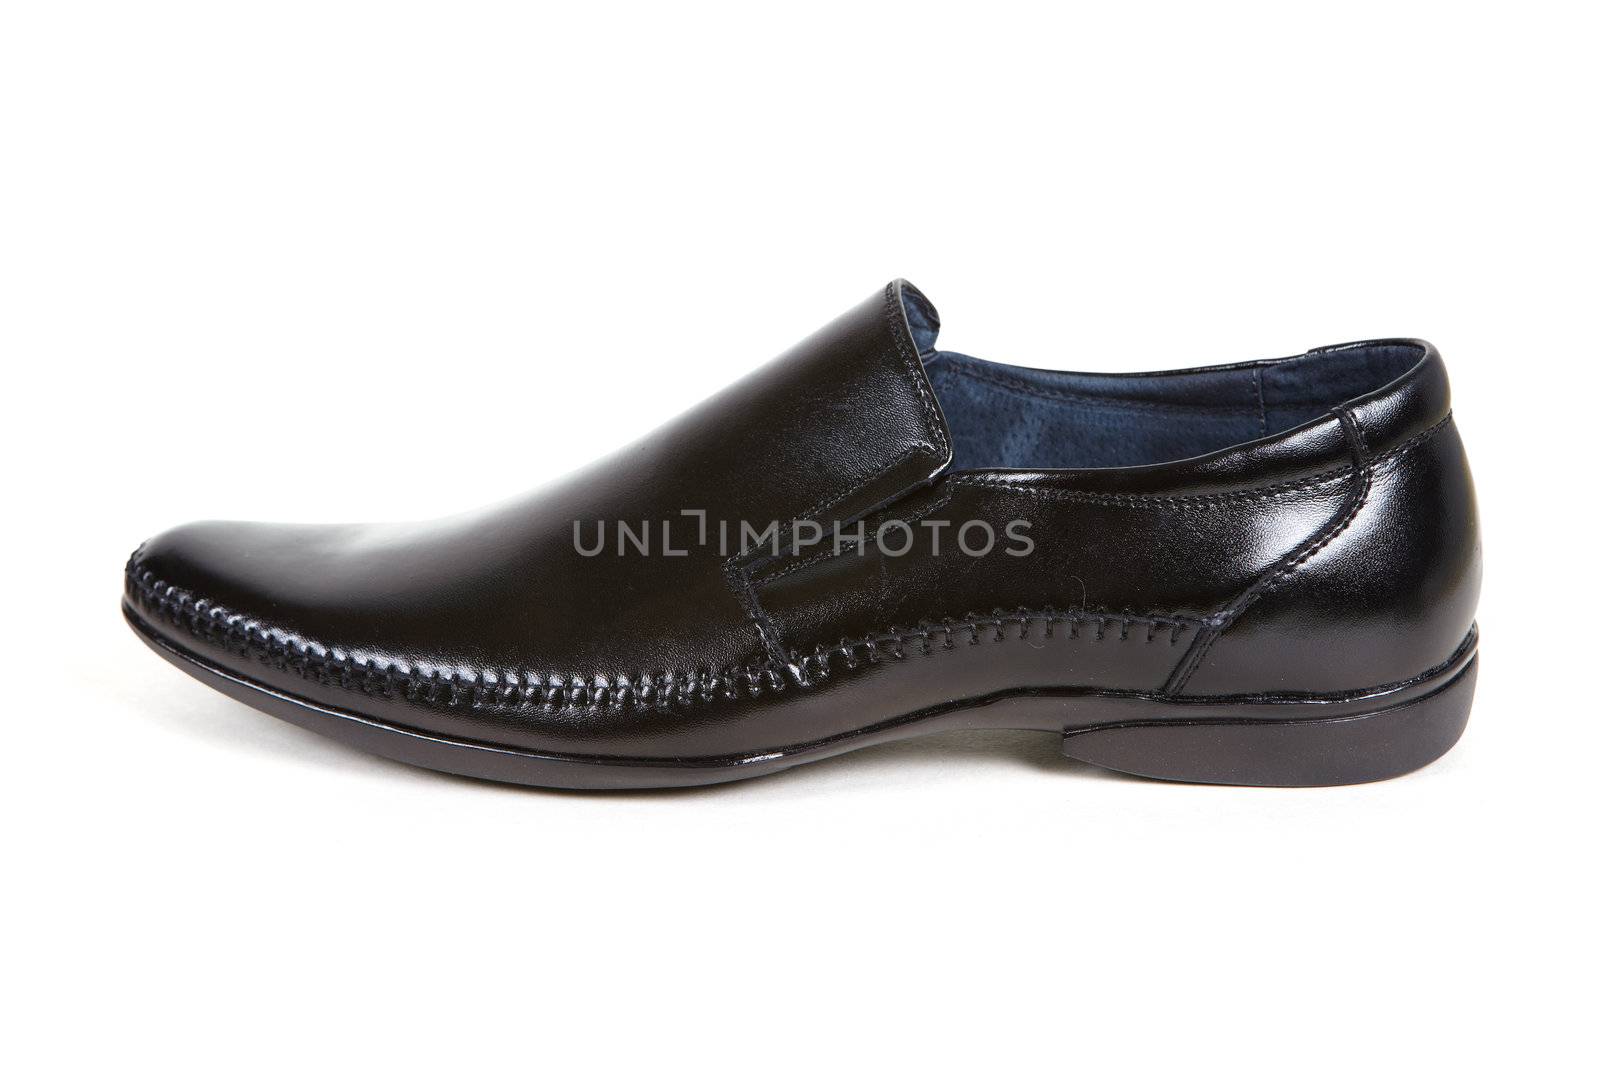 Patent-leather shoes by petrkurgan